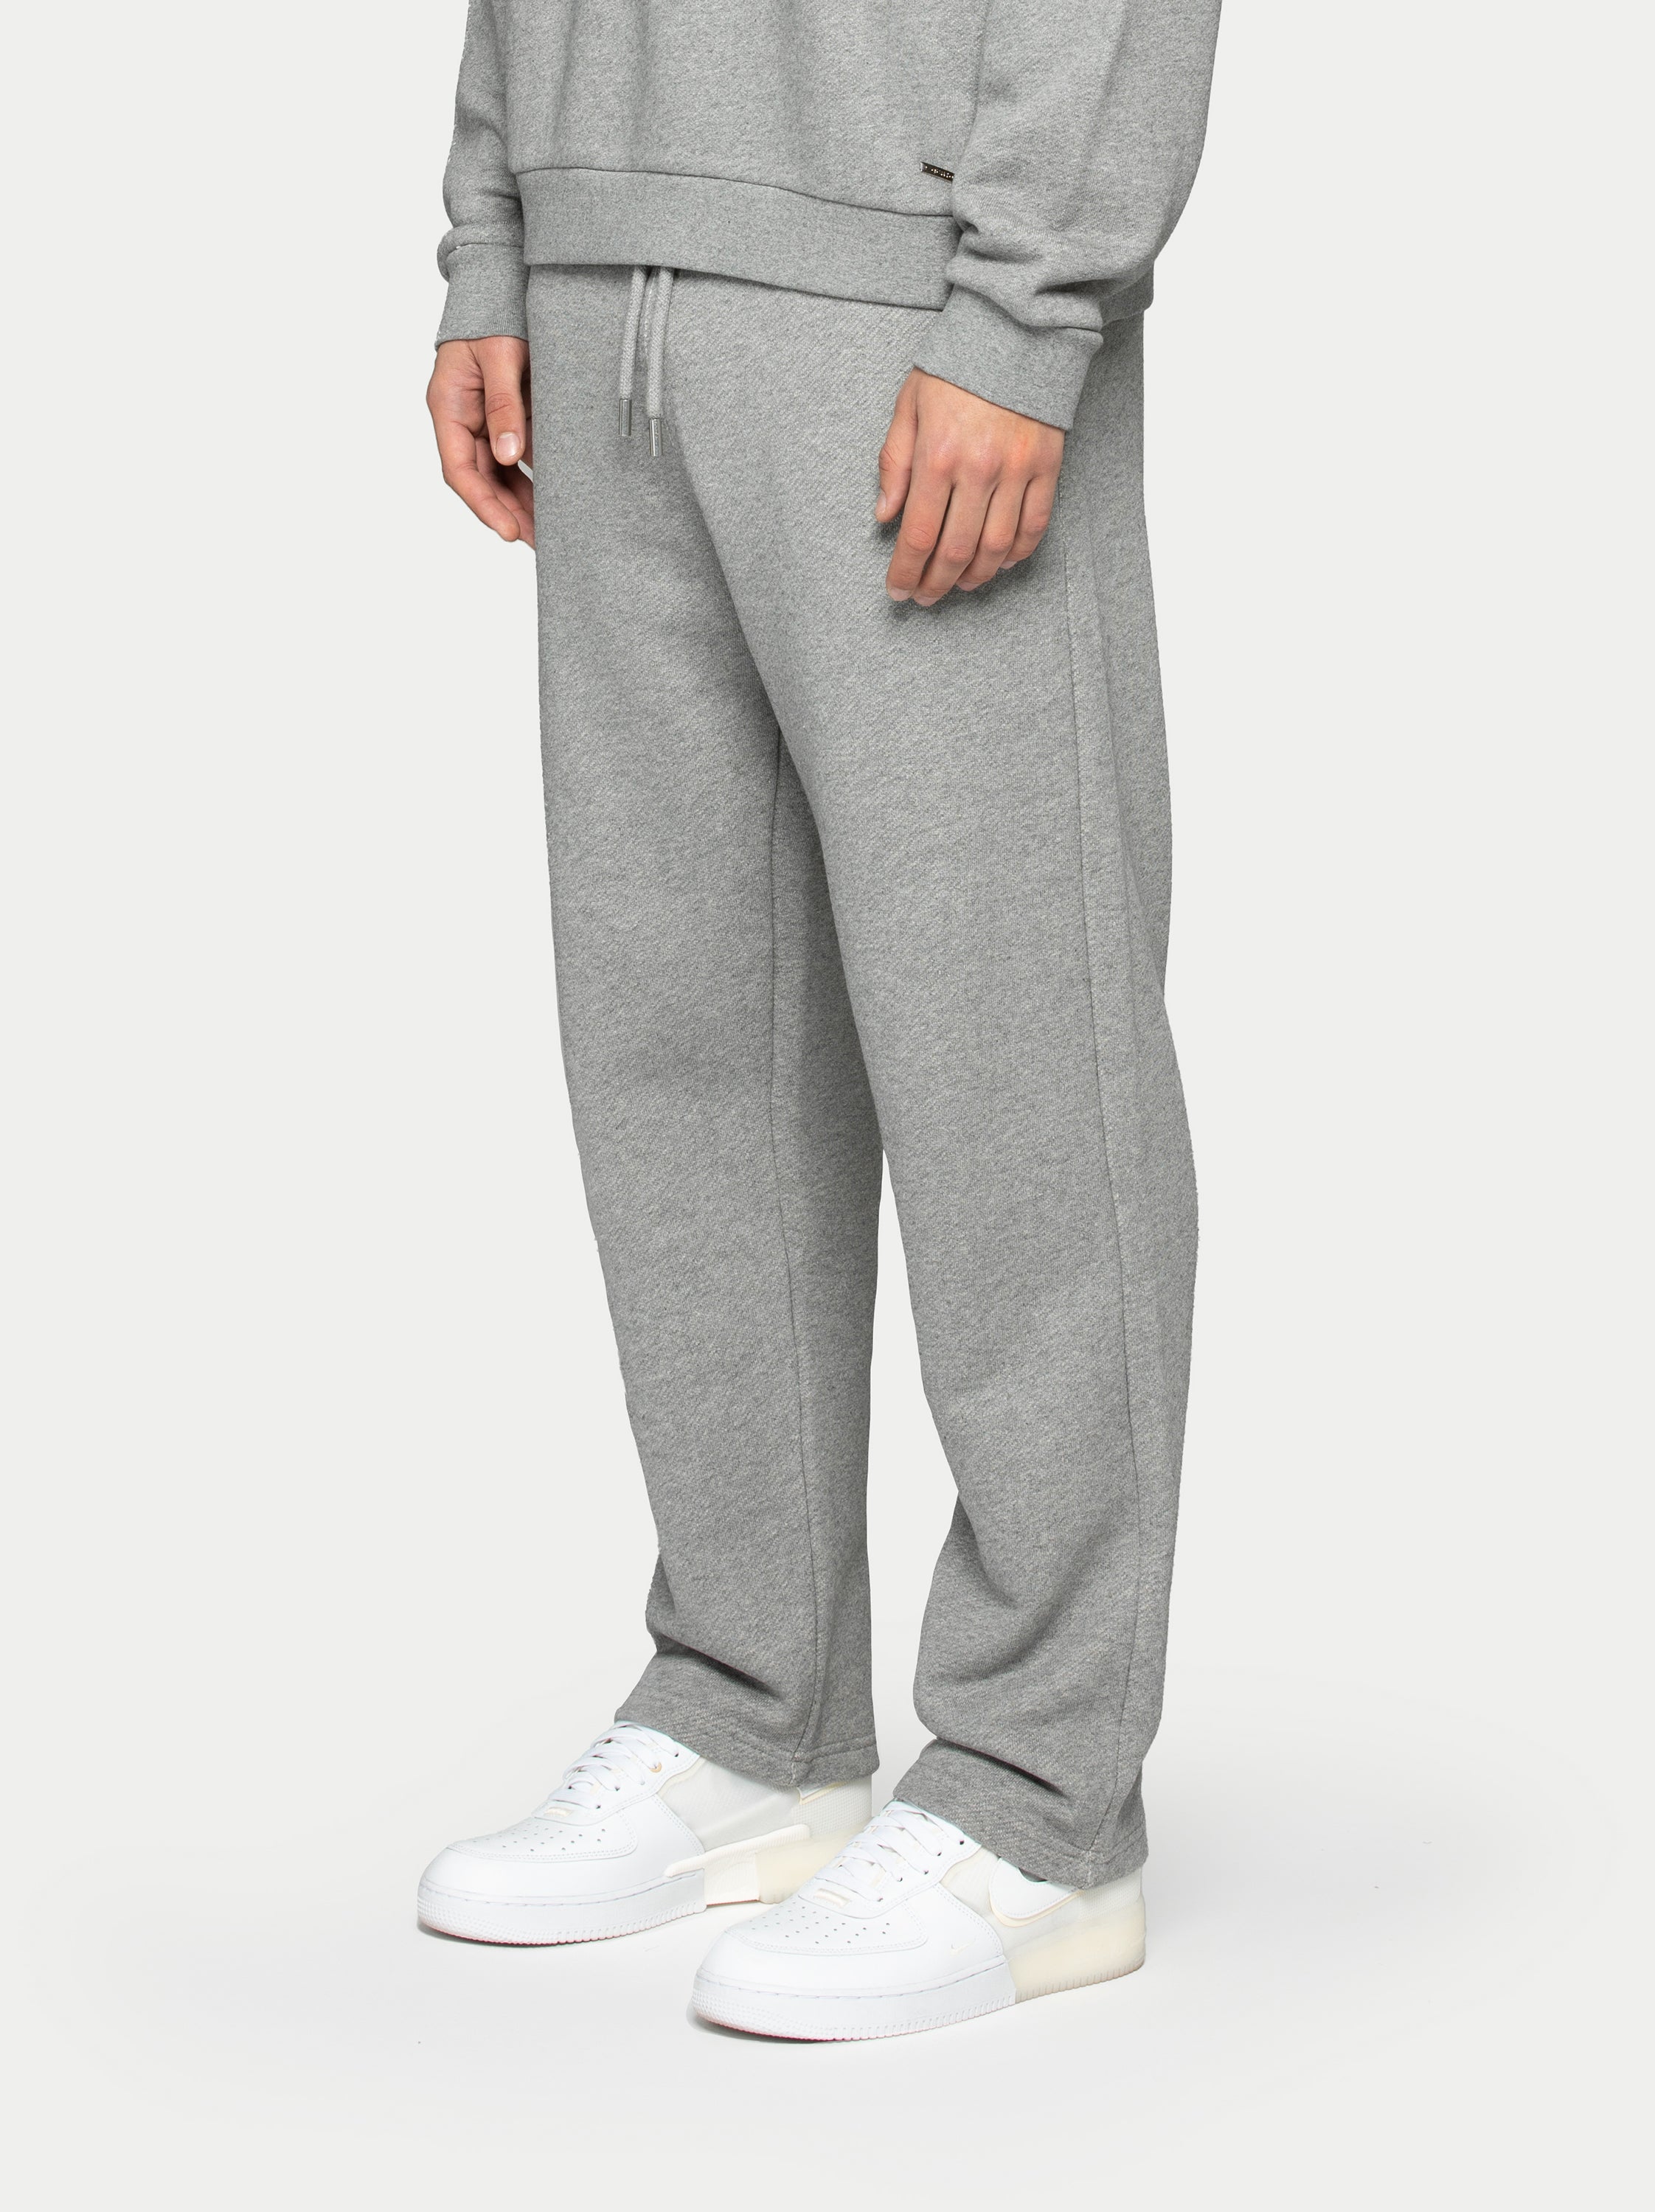 THE GYM PEOPLE Mens' Fleece Joggers Pants with Deep Pockets in Loose-fit  Style, Fleece Lined Light Grey, Small : Amazon.in: Clothing & Accessories